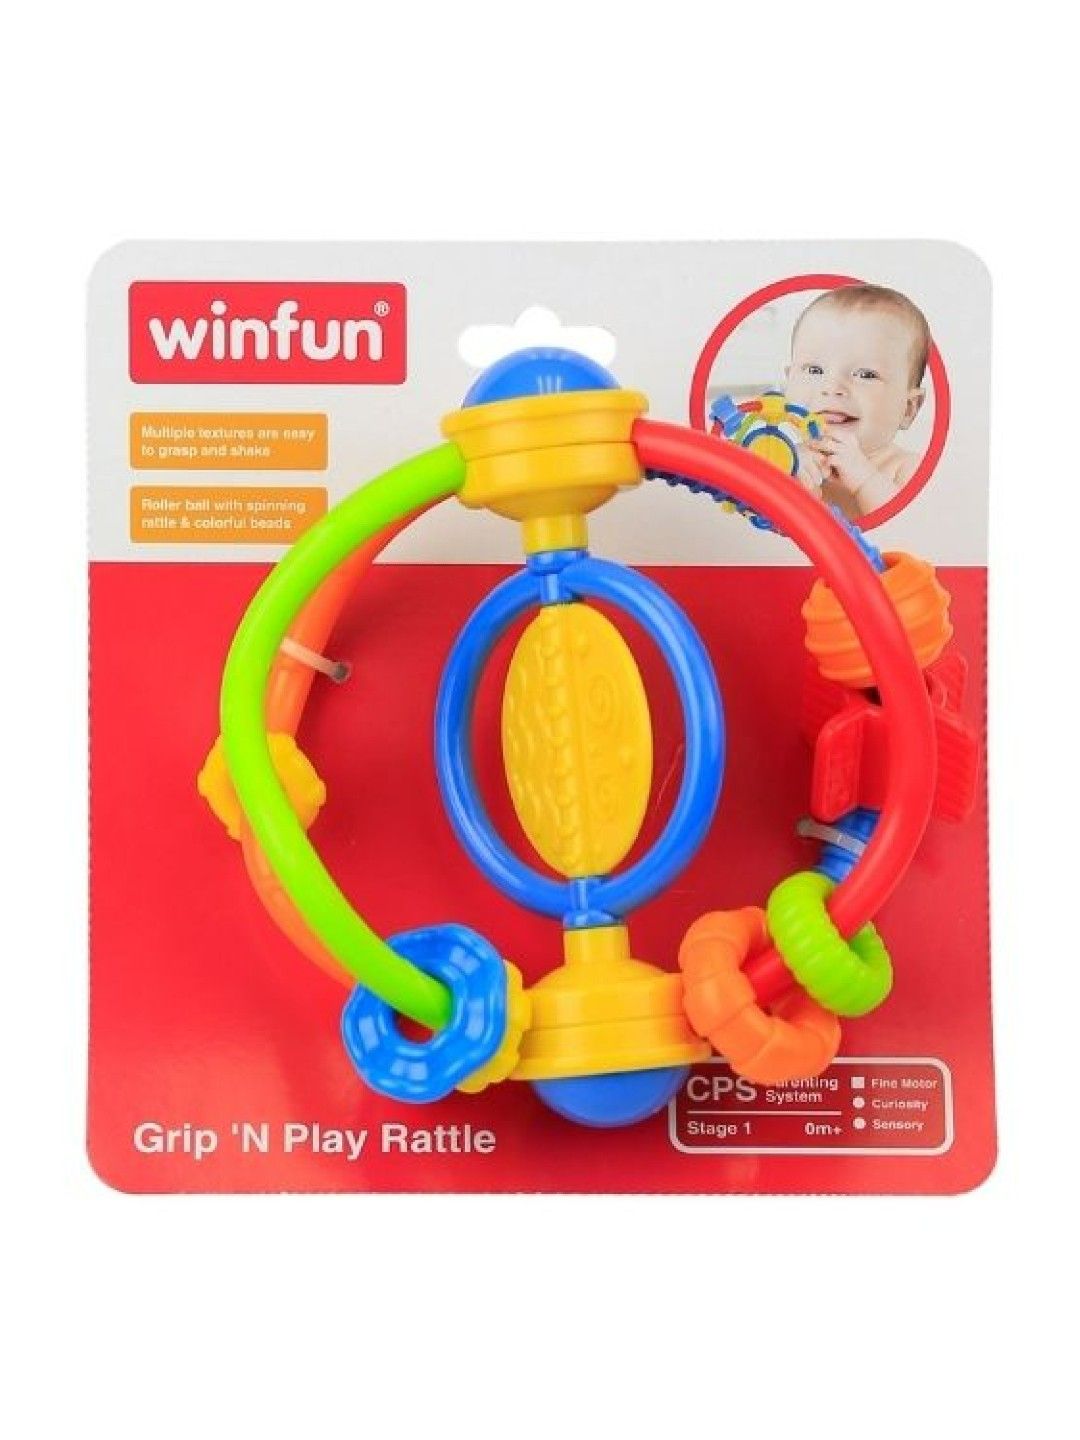 winfun Grip N Play Rattle (No Color- Image 1)